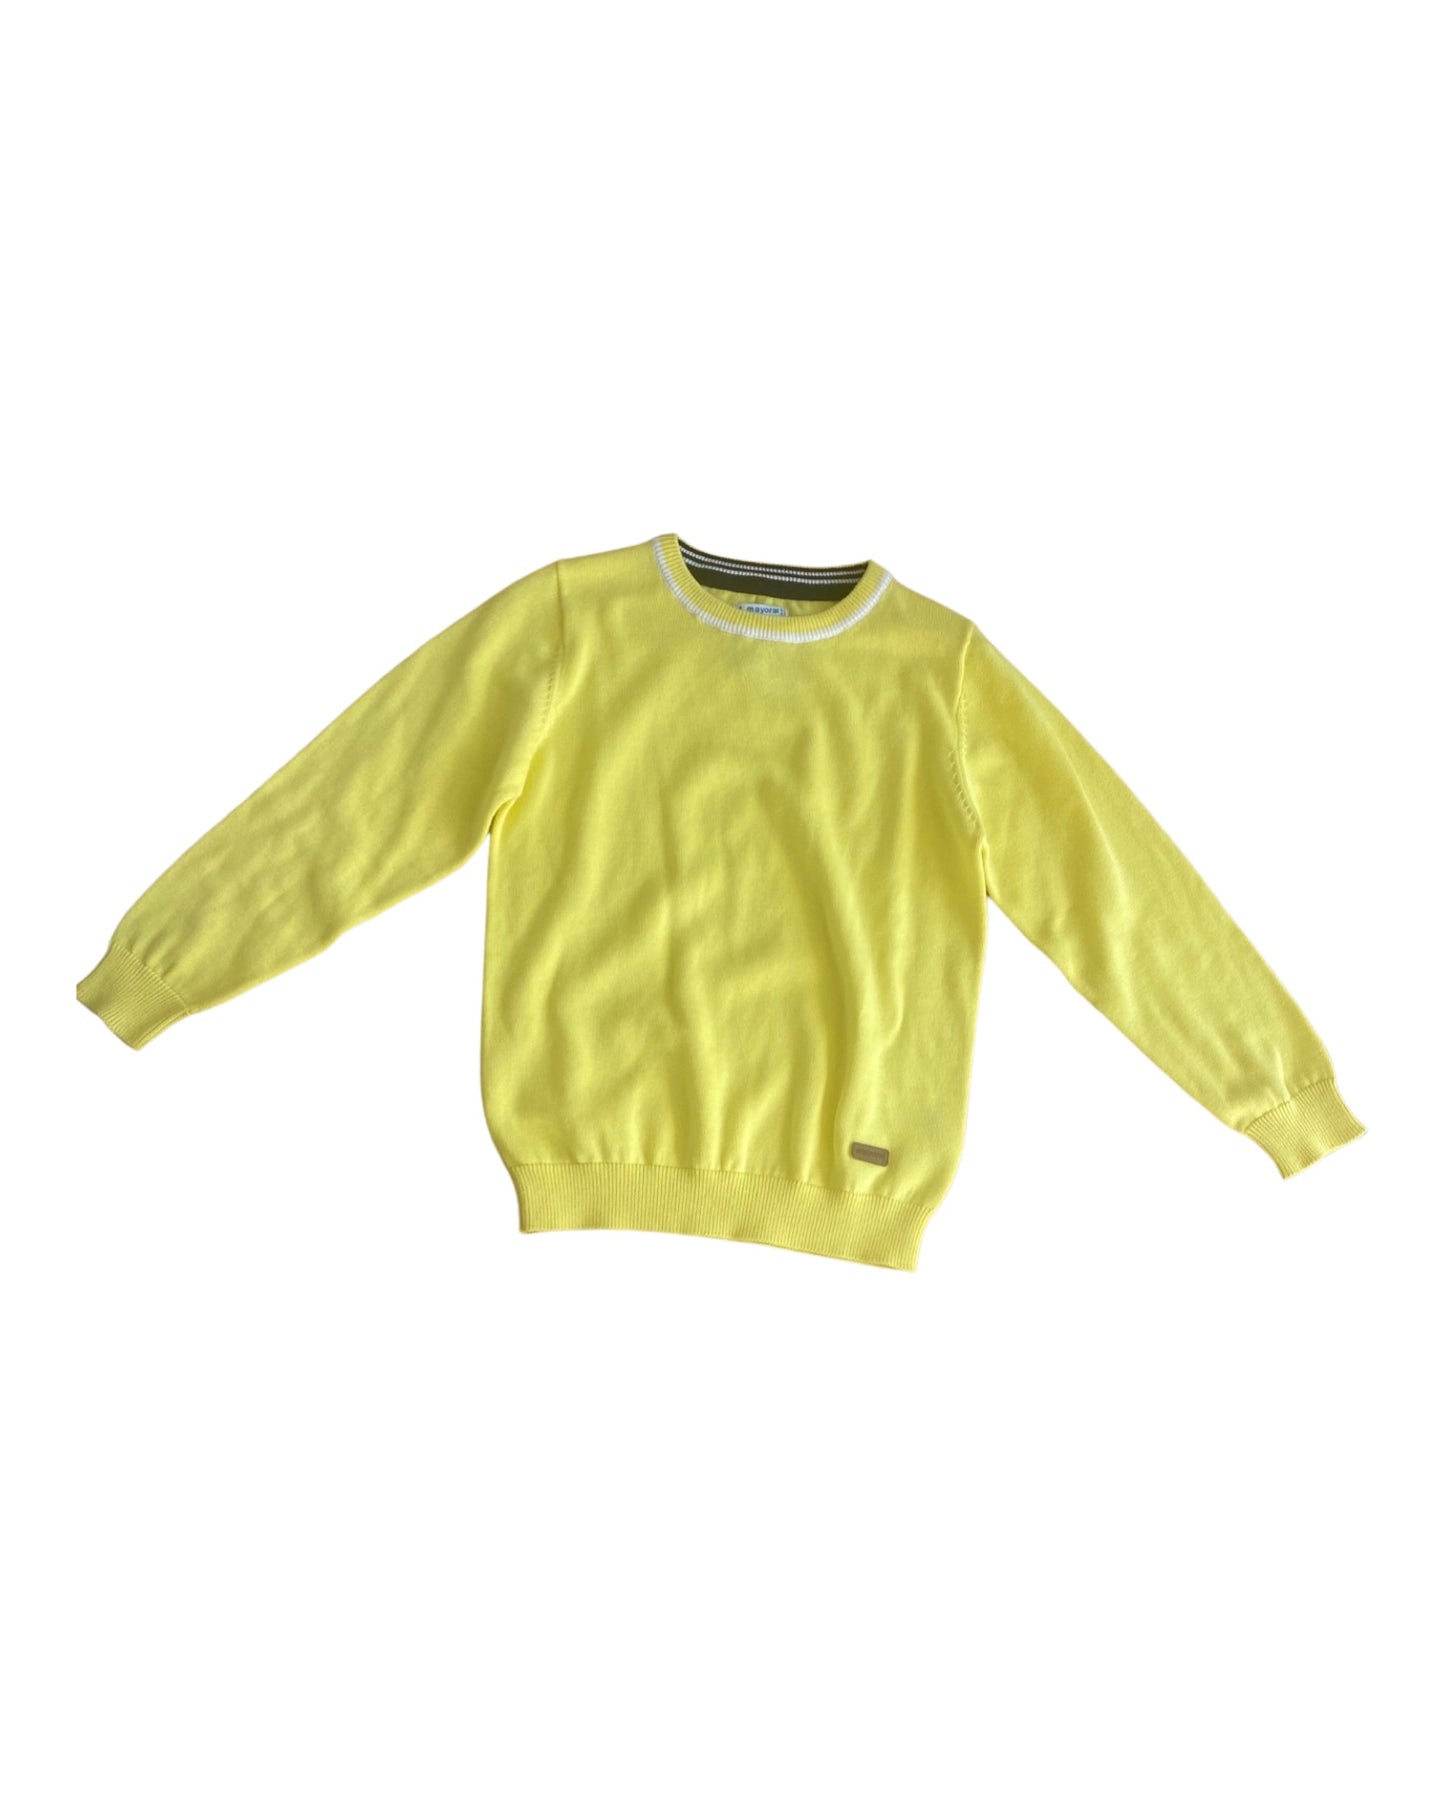 Mayoral canary yellow knit jumper (6yrs)